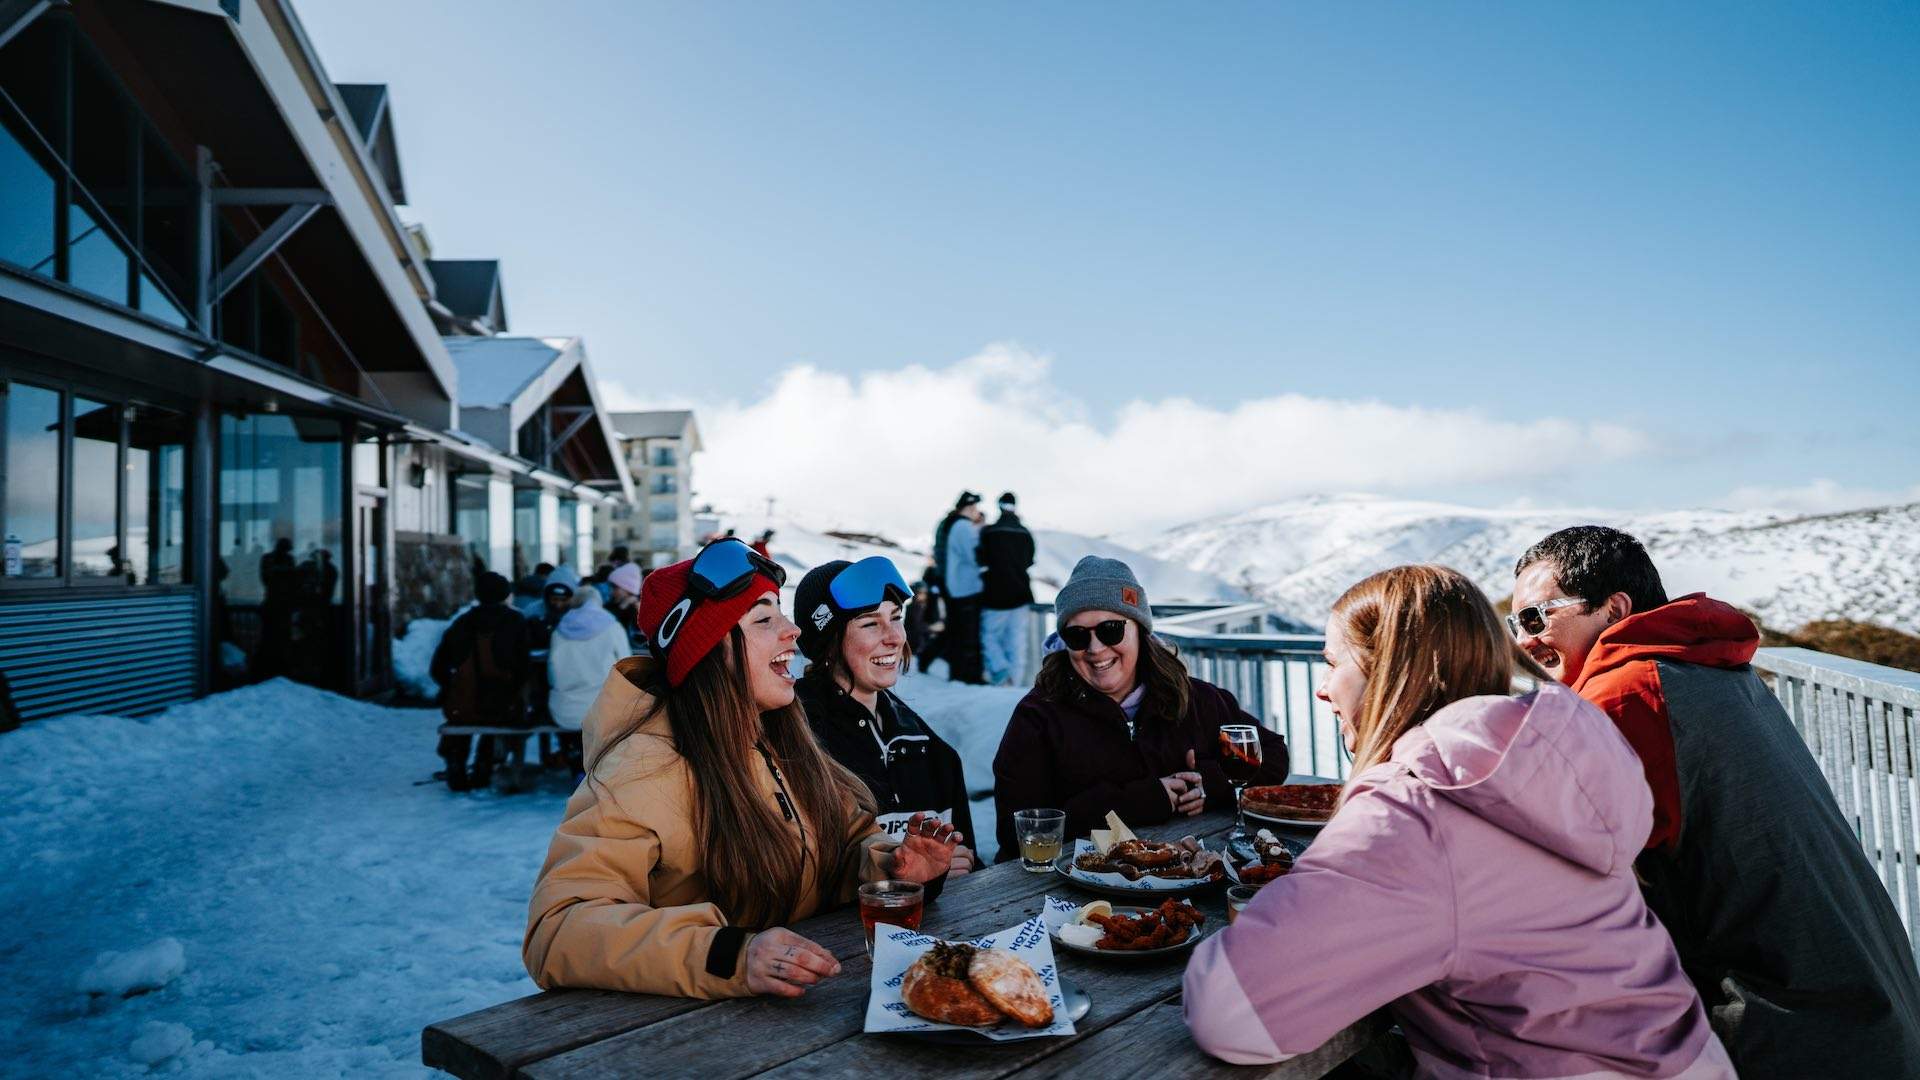 Where to Grab a Bite, Some Downtime and a Good Nights Sleep When You're Done Shredding Powder on Mount Hotham This Winter